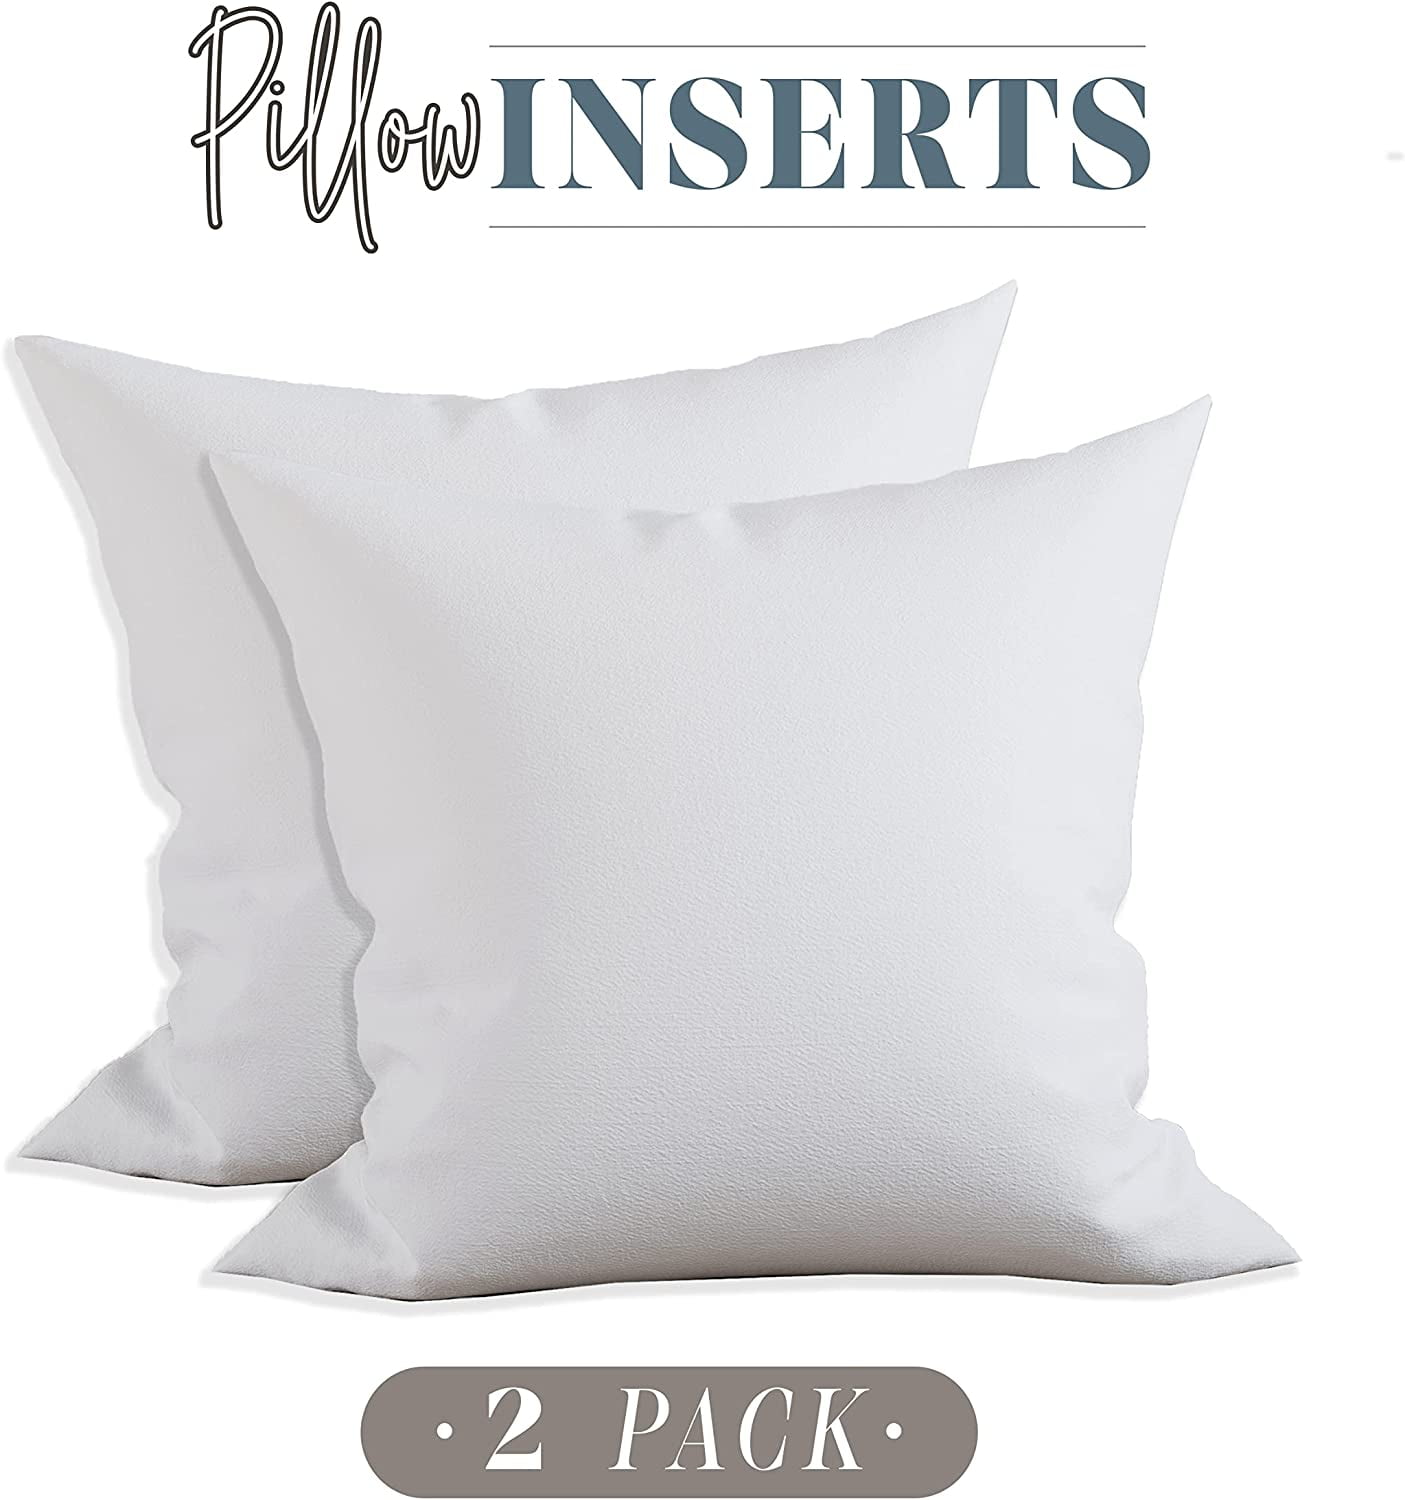 Elegant Comfort 24 x 24 Throw Pillow Inserts - 2-Pack Pillow Insert Poly-Cotton Shell with Siliconized Fiber Filling - Square Form Decorative for